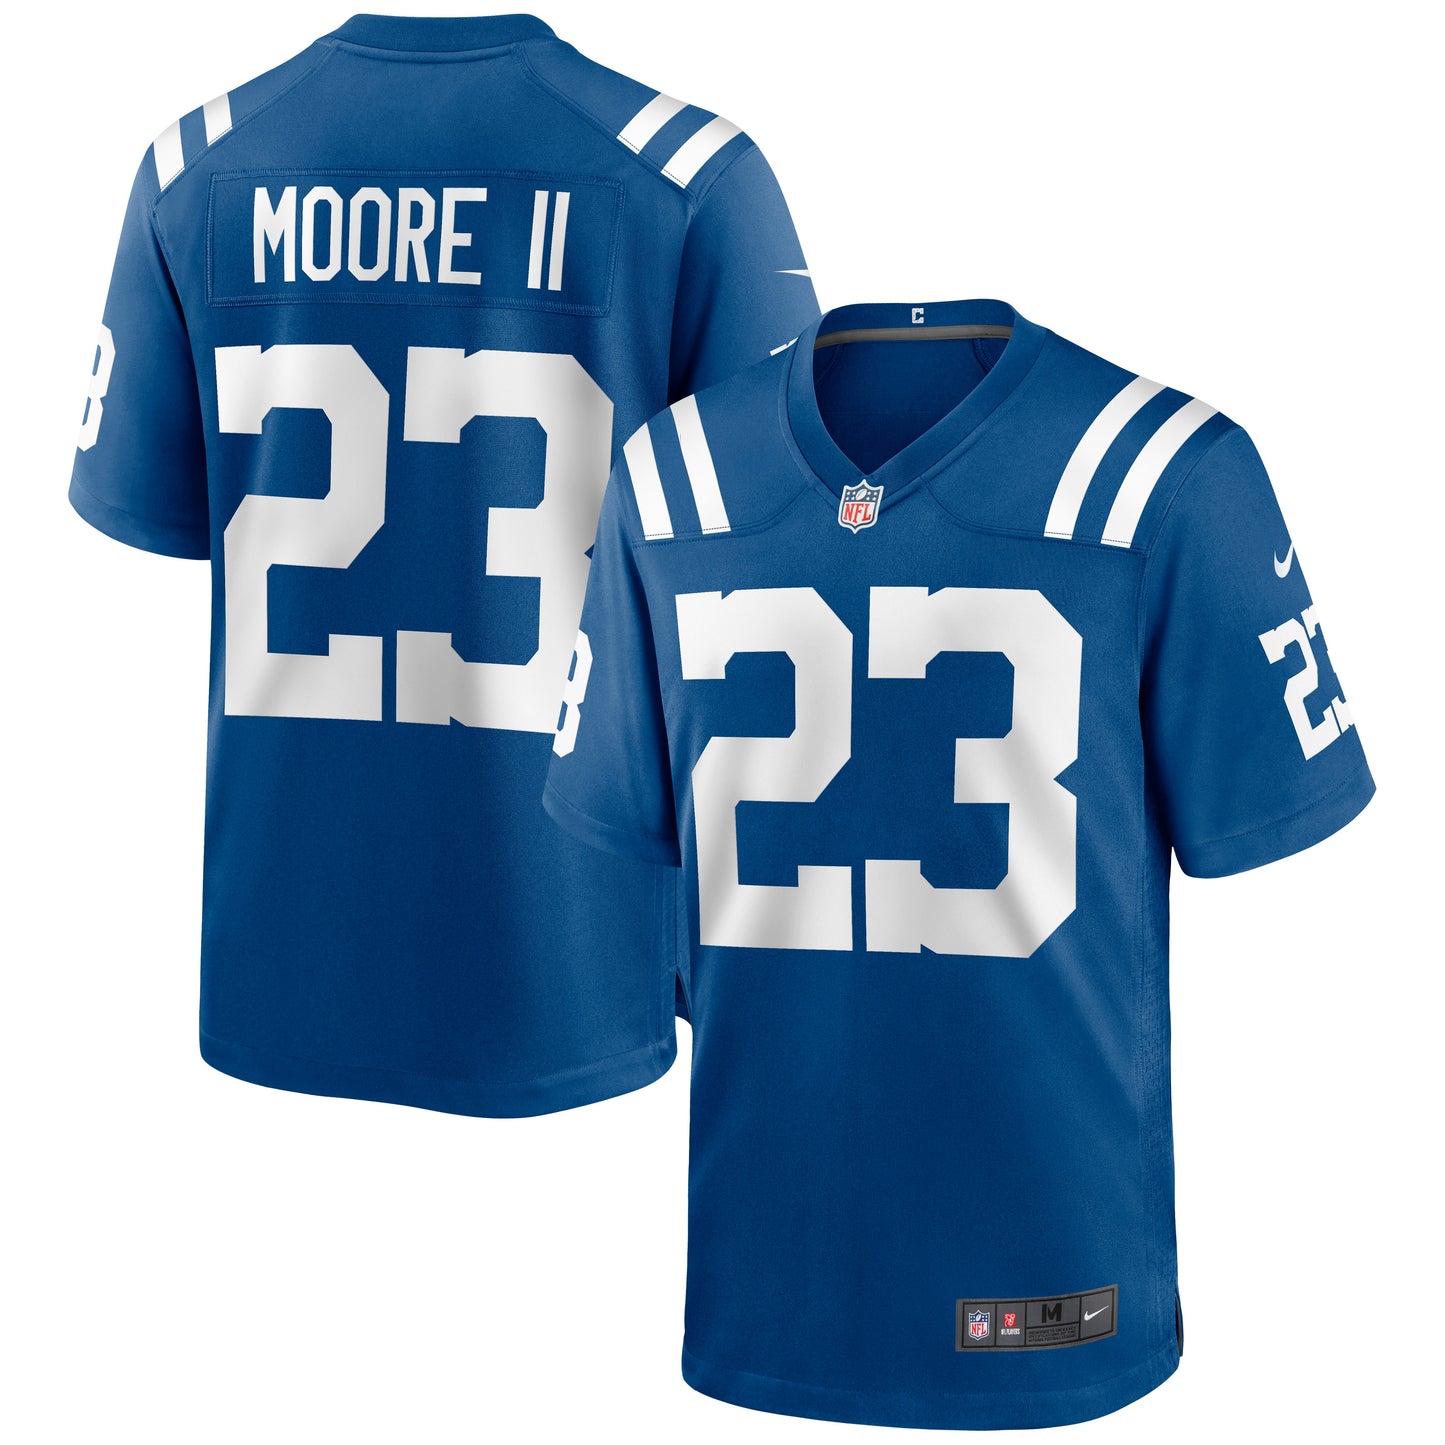 Kenny Moore II Indianapolis Colts Nike Game Jersey - Royal